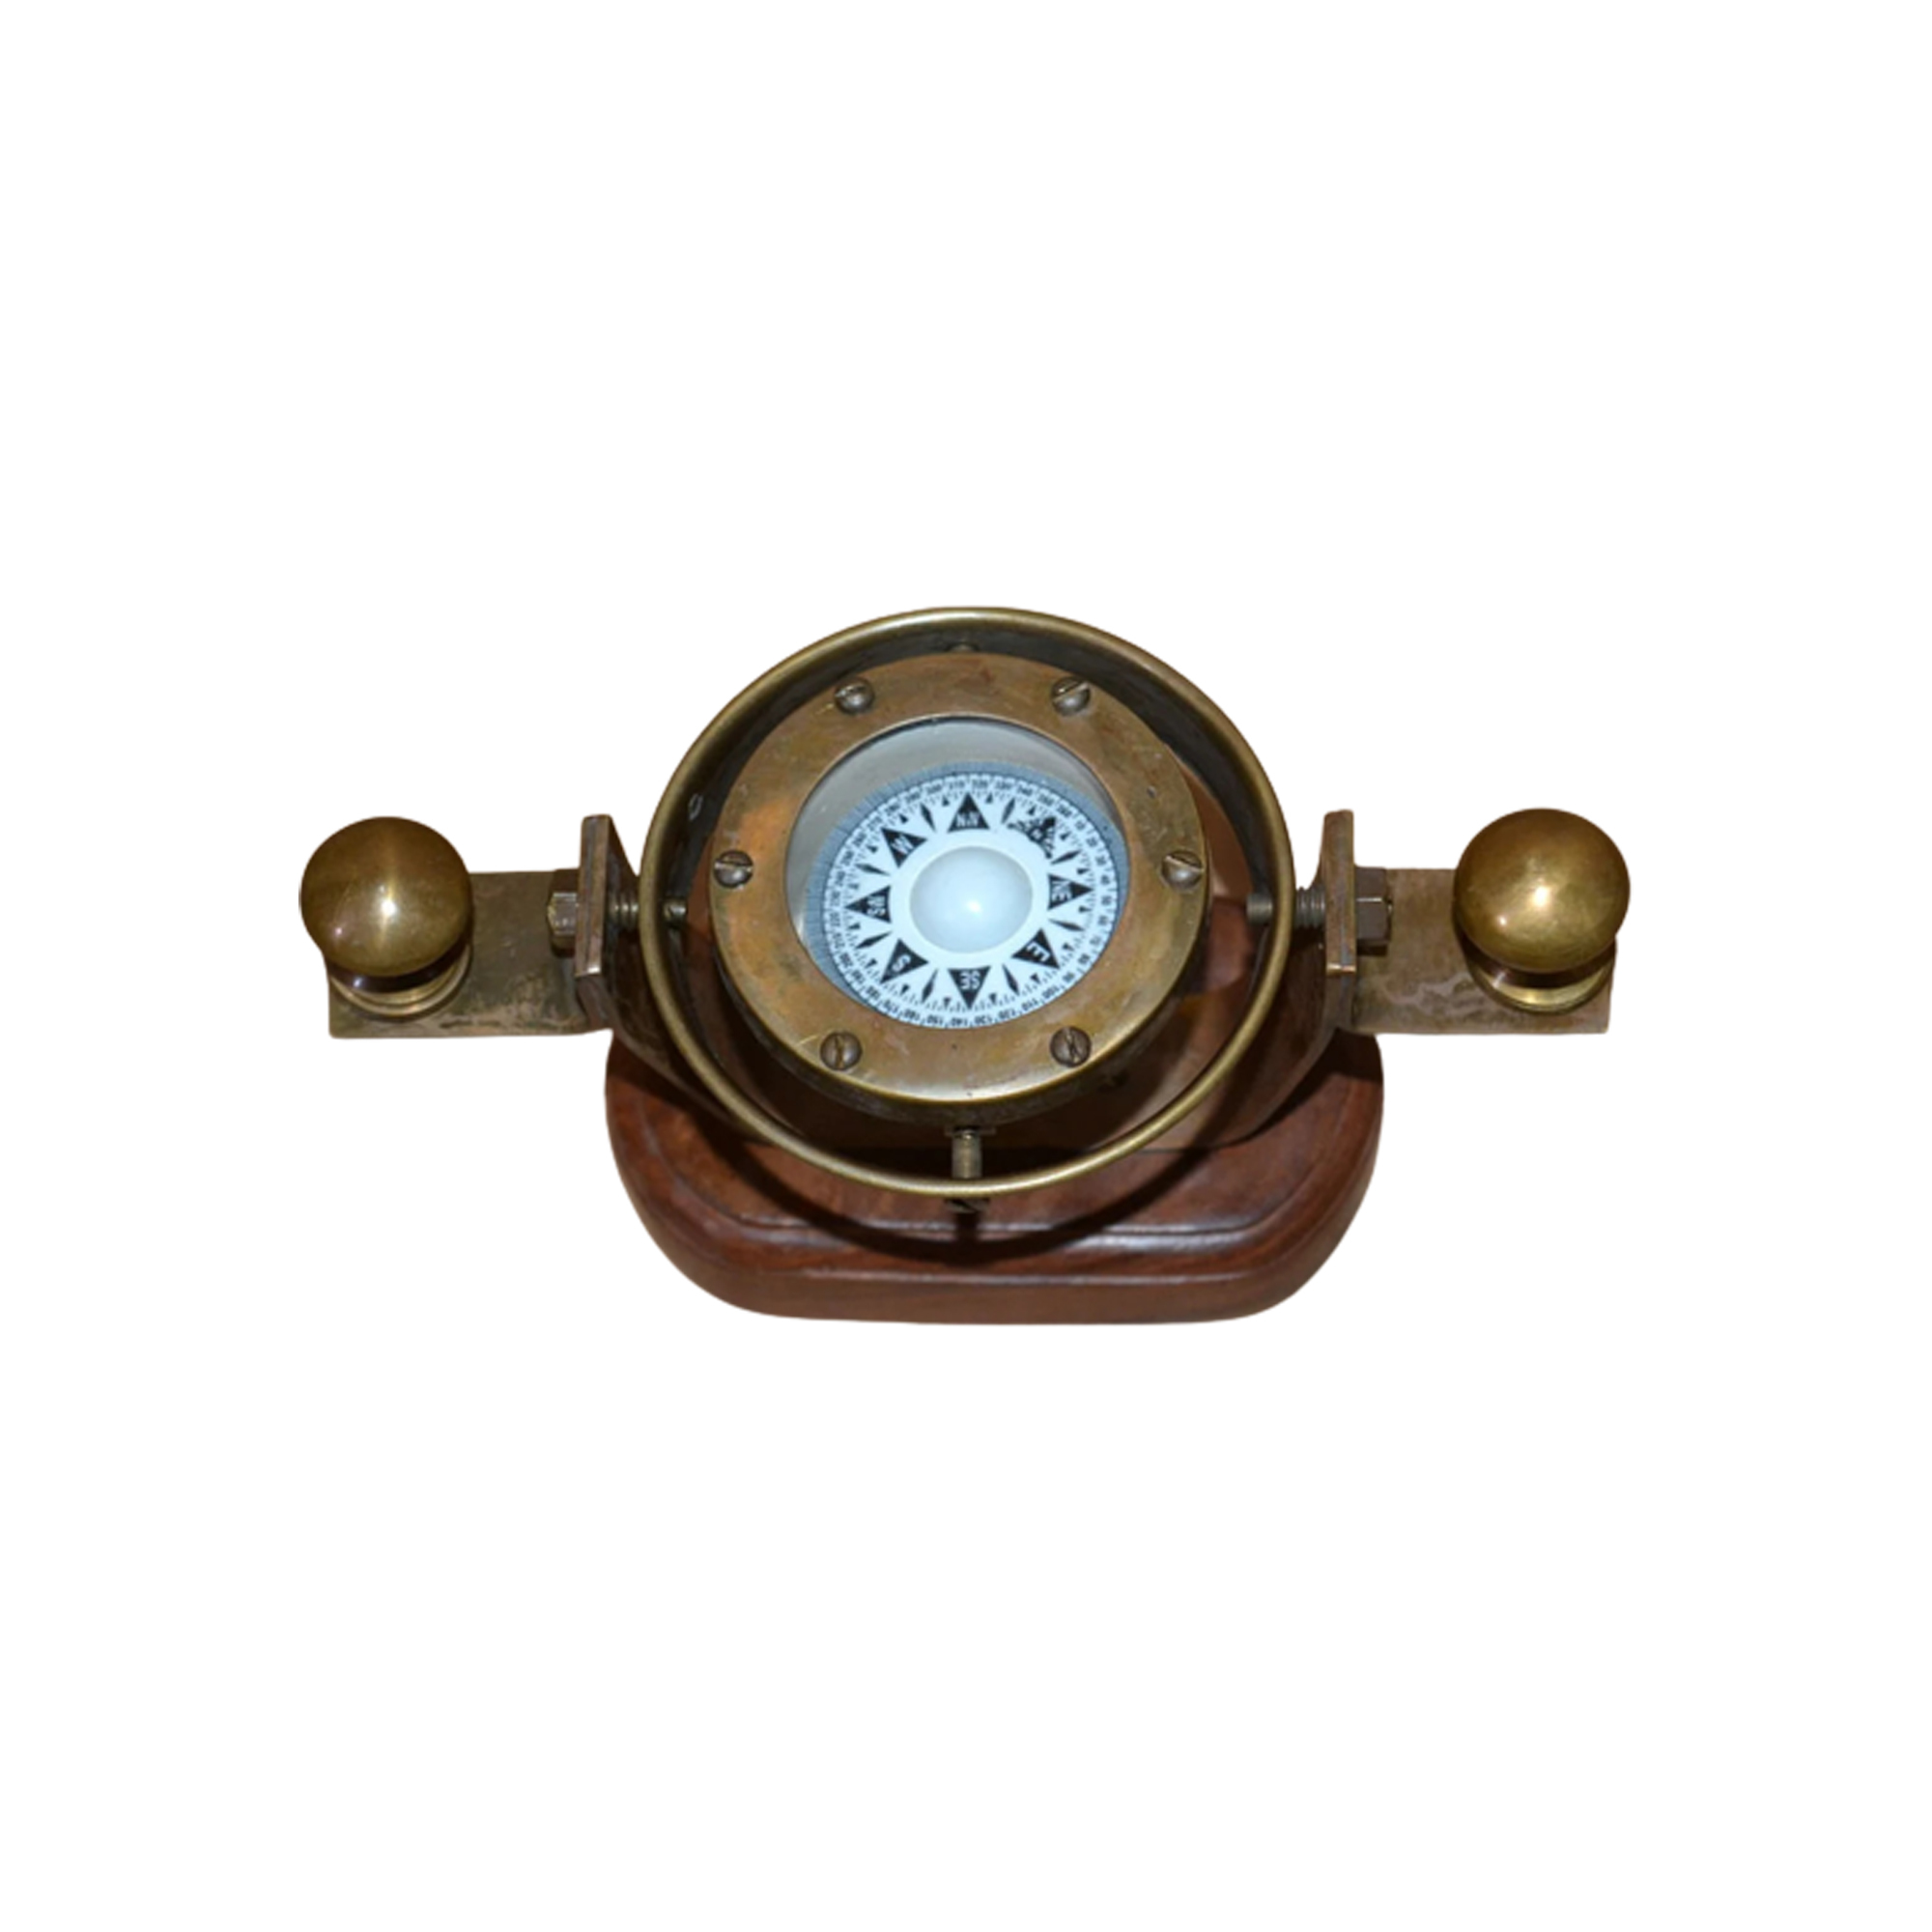 Brass Compass With Wooden Base